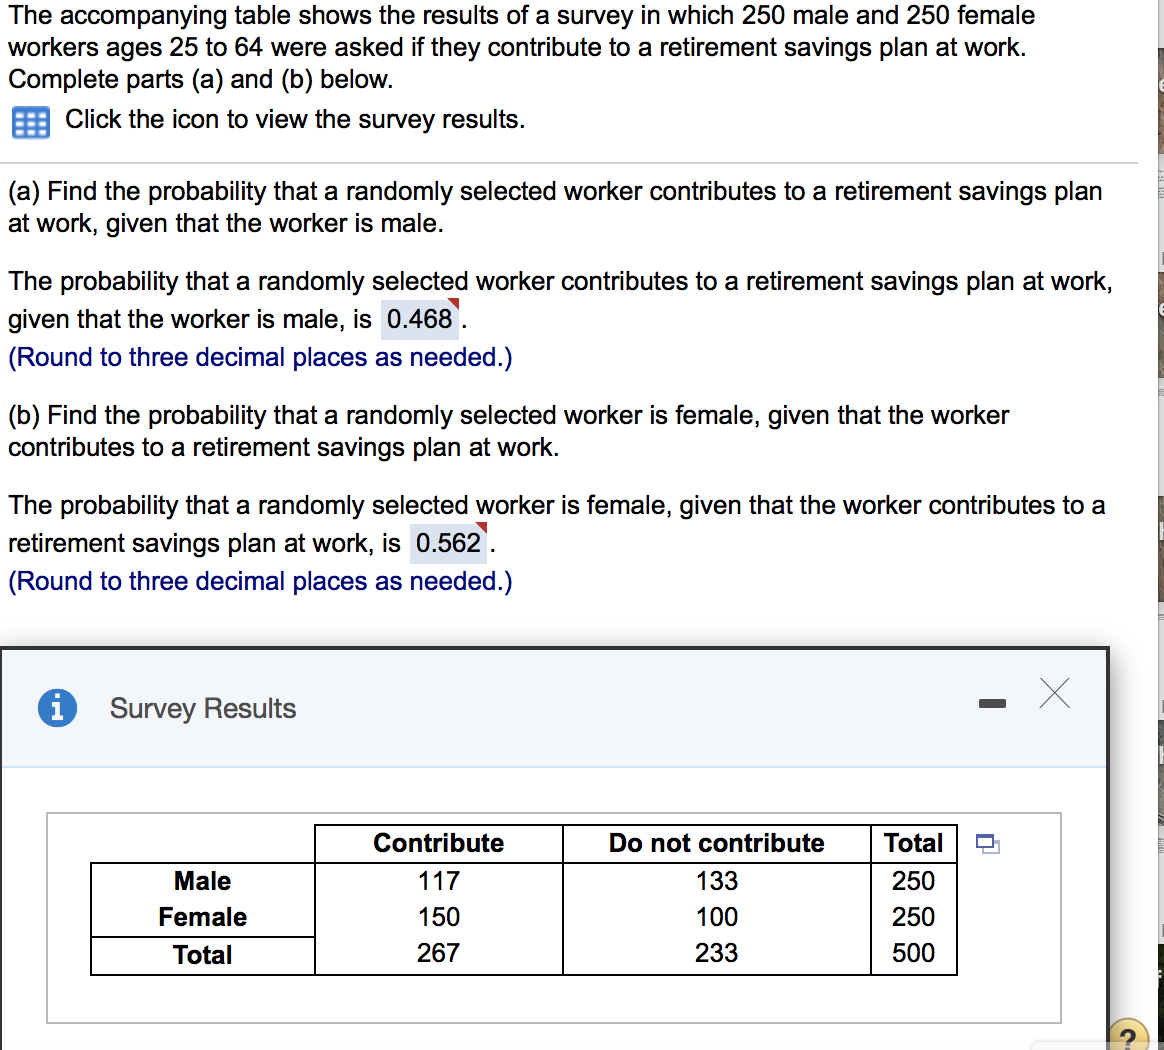 The accompanying table shows the results of a survey in which 250 male and 250 female
workers ages 25 to 64 were asked if they contribute to a retirement savings plan at work.
Complete parts (a) and (b) below.
Click the icon to view the survey results.
(a) Find the probability that a randomly selected worker contributes to a retirement savings plan
at work, given that the worker is male.
The probability that a randomly selected worker contributes to a retirement savings plan at work,
given that the worker is male, is 0.468'.
(Round to three decimal places as needed.)
(b) Find the probability that a randomly selected worker is female, given that the worker
contributes to a retirement savings plan at work.
The probability that a randomly selected worker is female, given that the worker contributes to a
retirement savings plan at work, is 0.562.
(Round to three decimal places as needed.)
Survey Results
Contribute
Do not contribute
Total
Male
117
133
250
Female
150
100
250
Total
267
233
500
